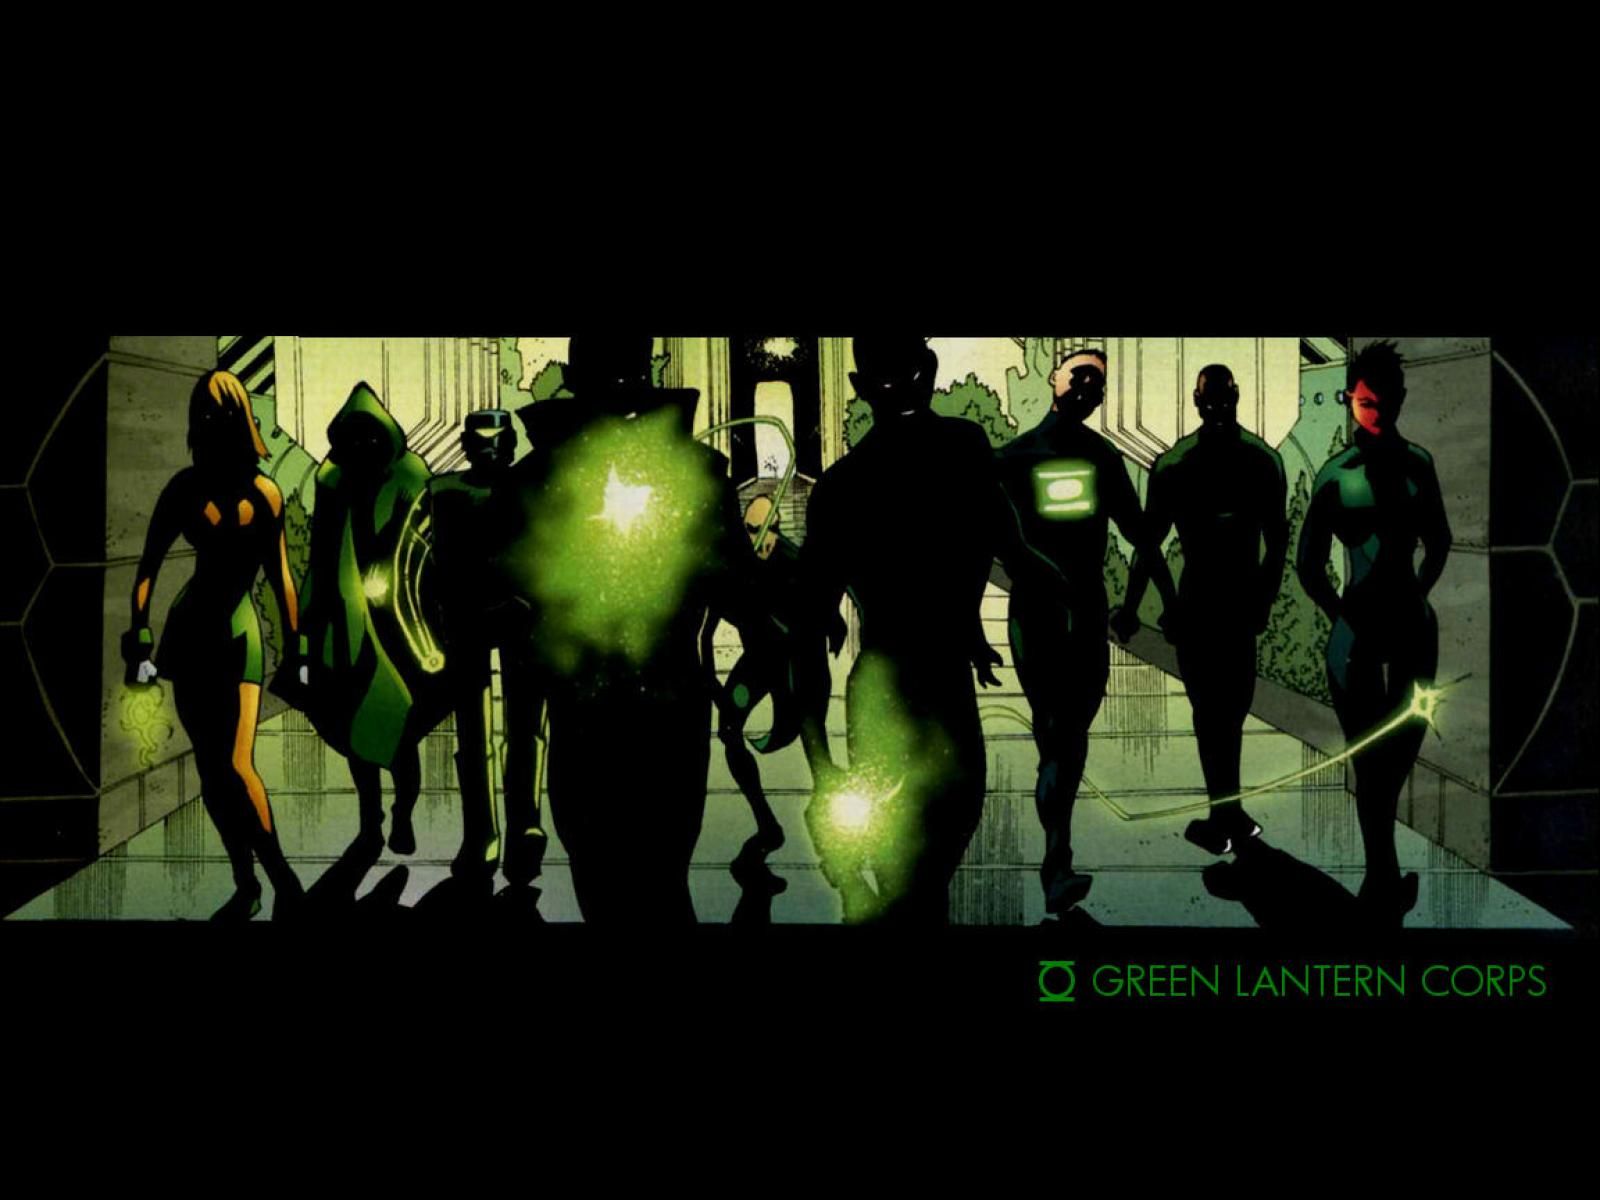 The Green Lantern Corps Image The Team HD Wallpaper